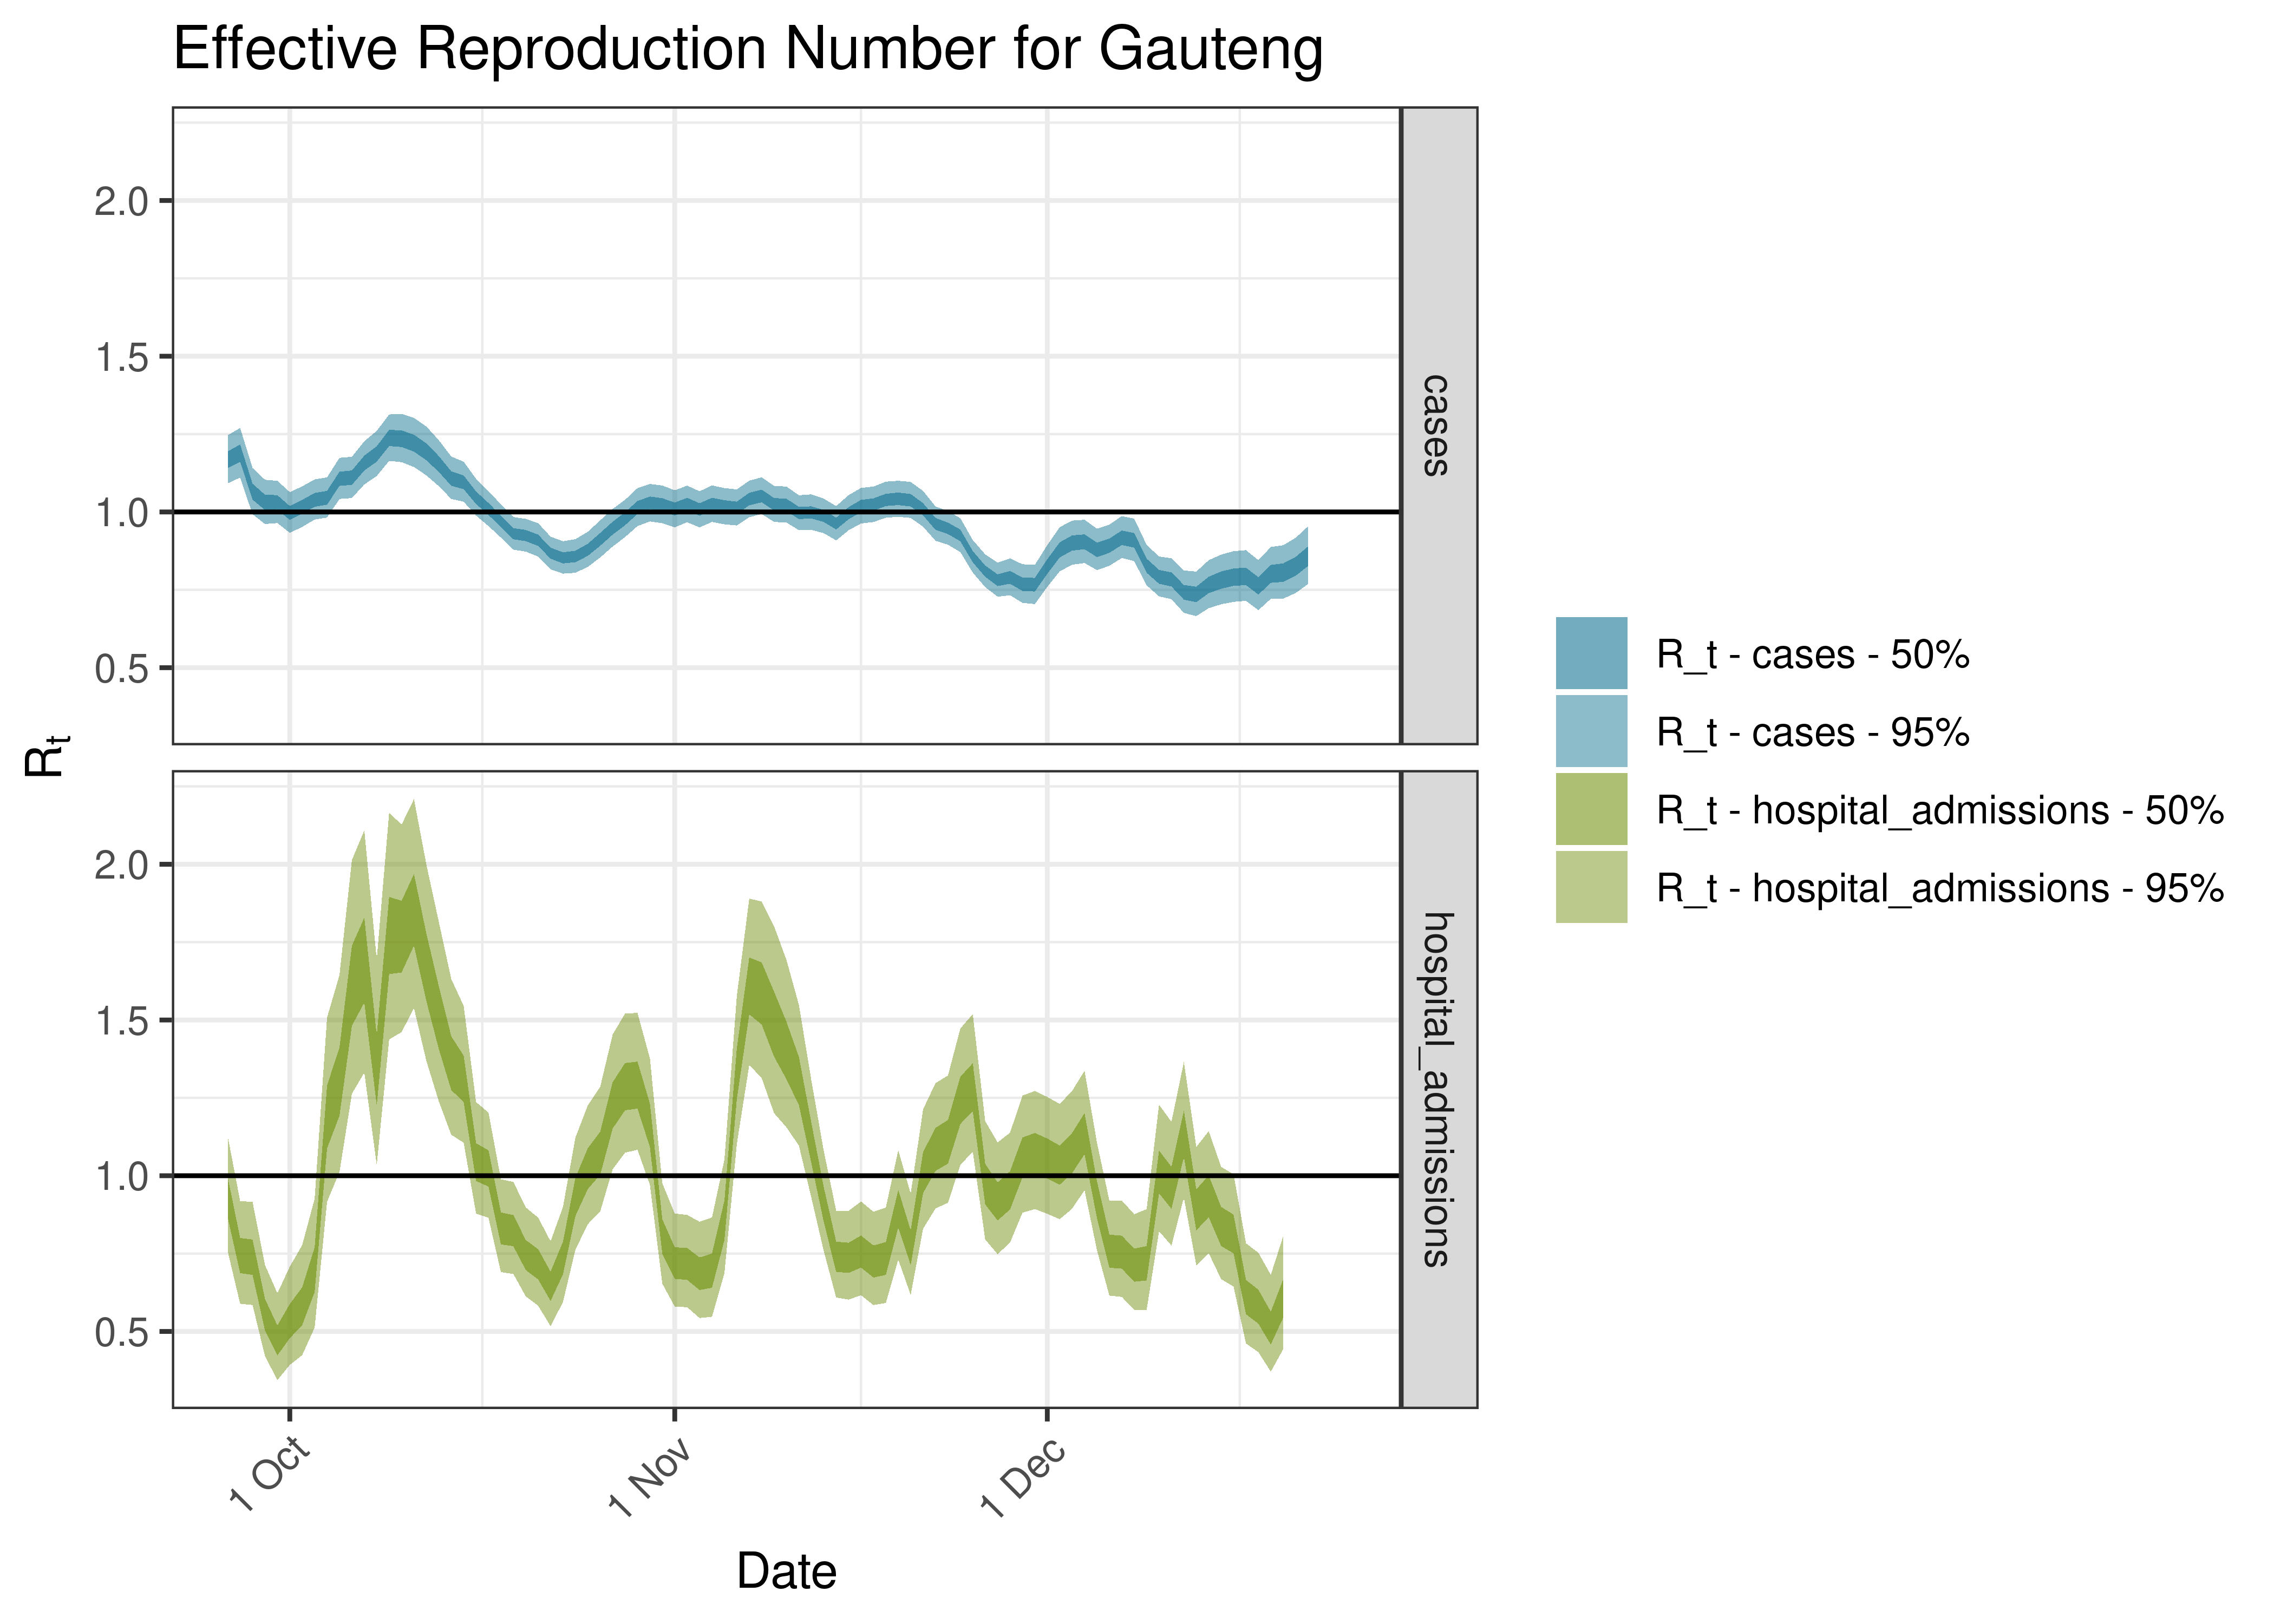 Estimated Effective Reproduction Number for Gauteng over last 90 days